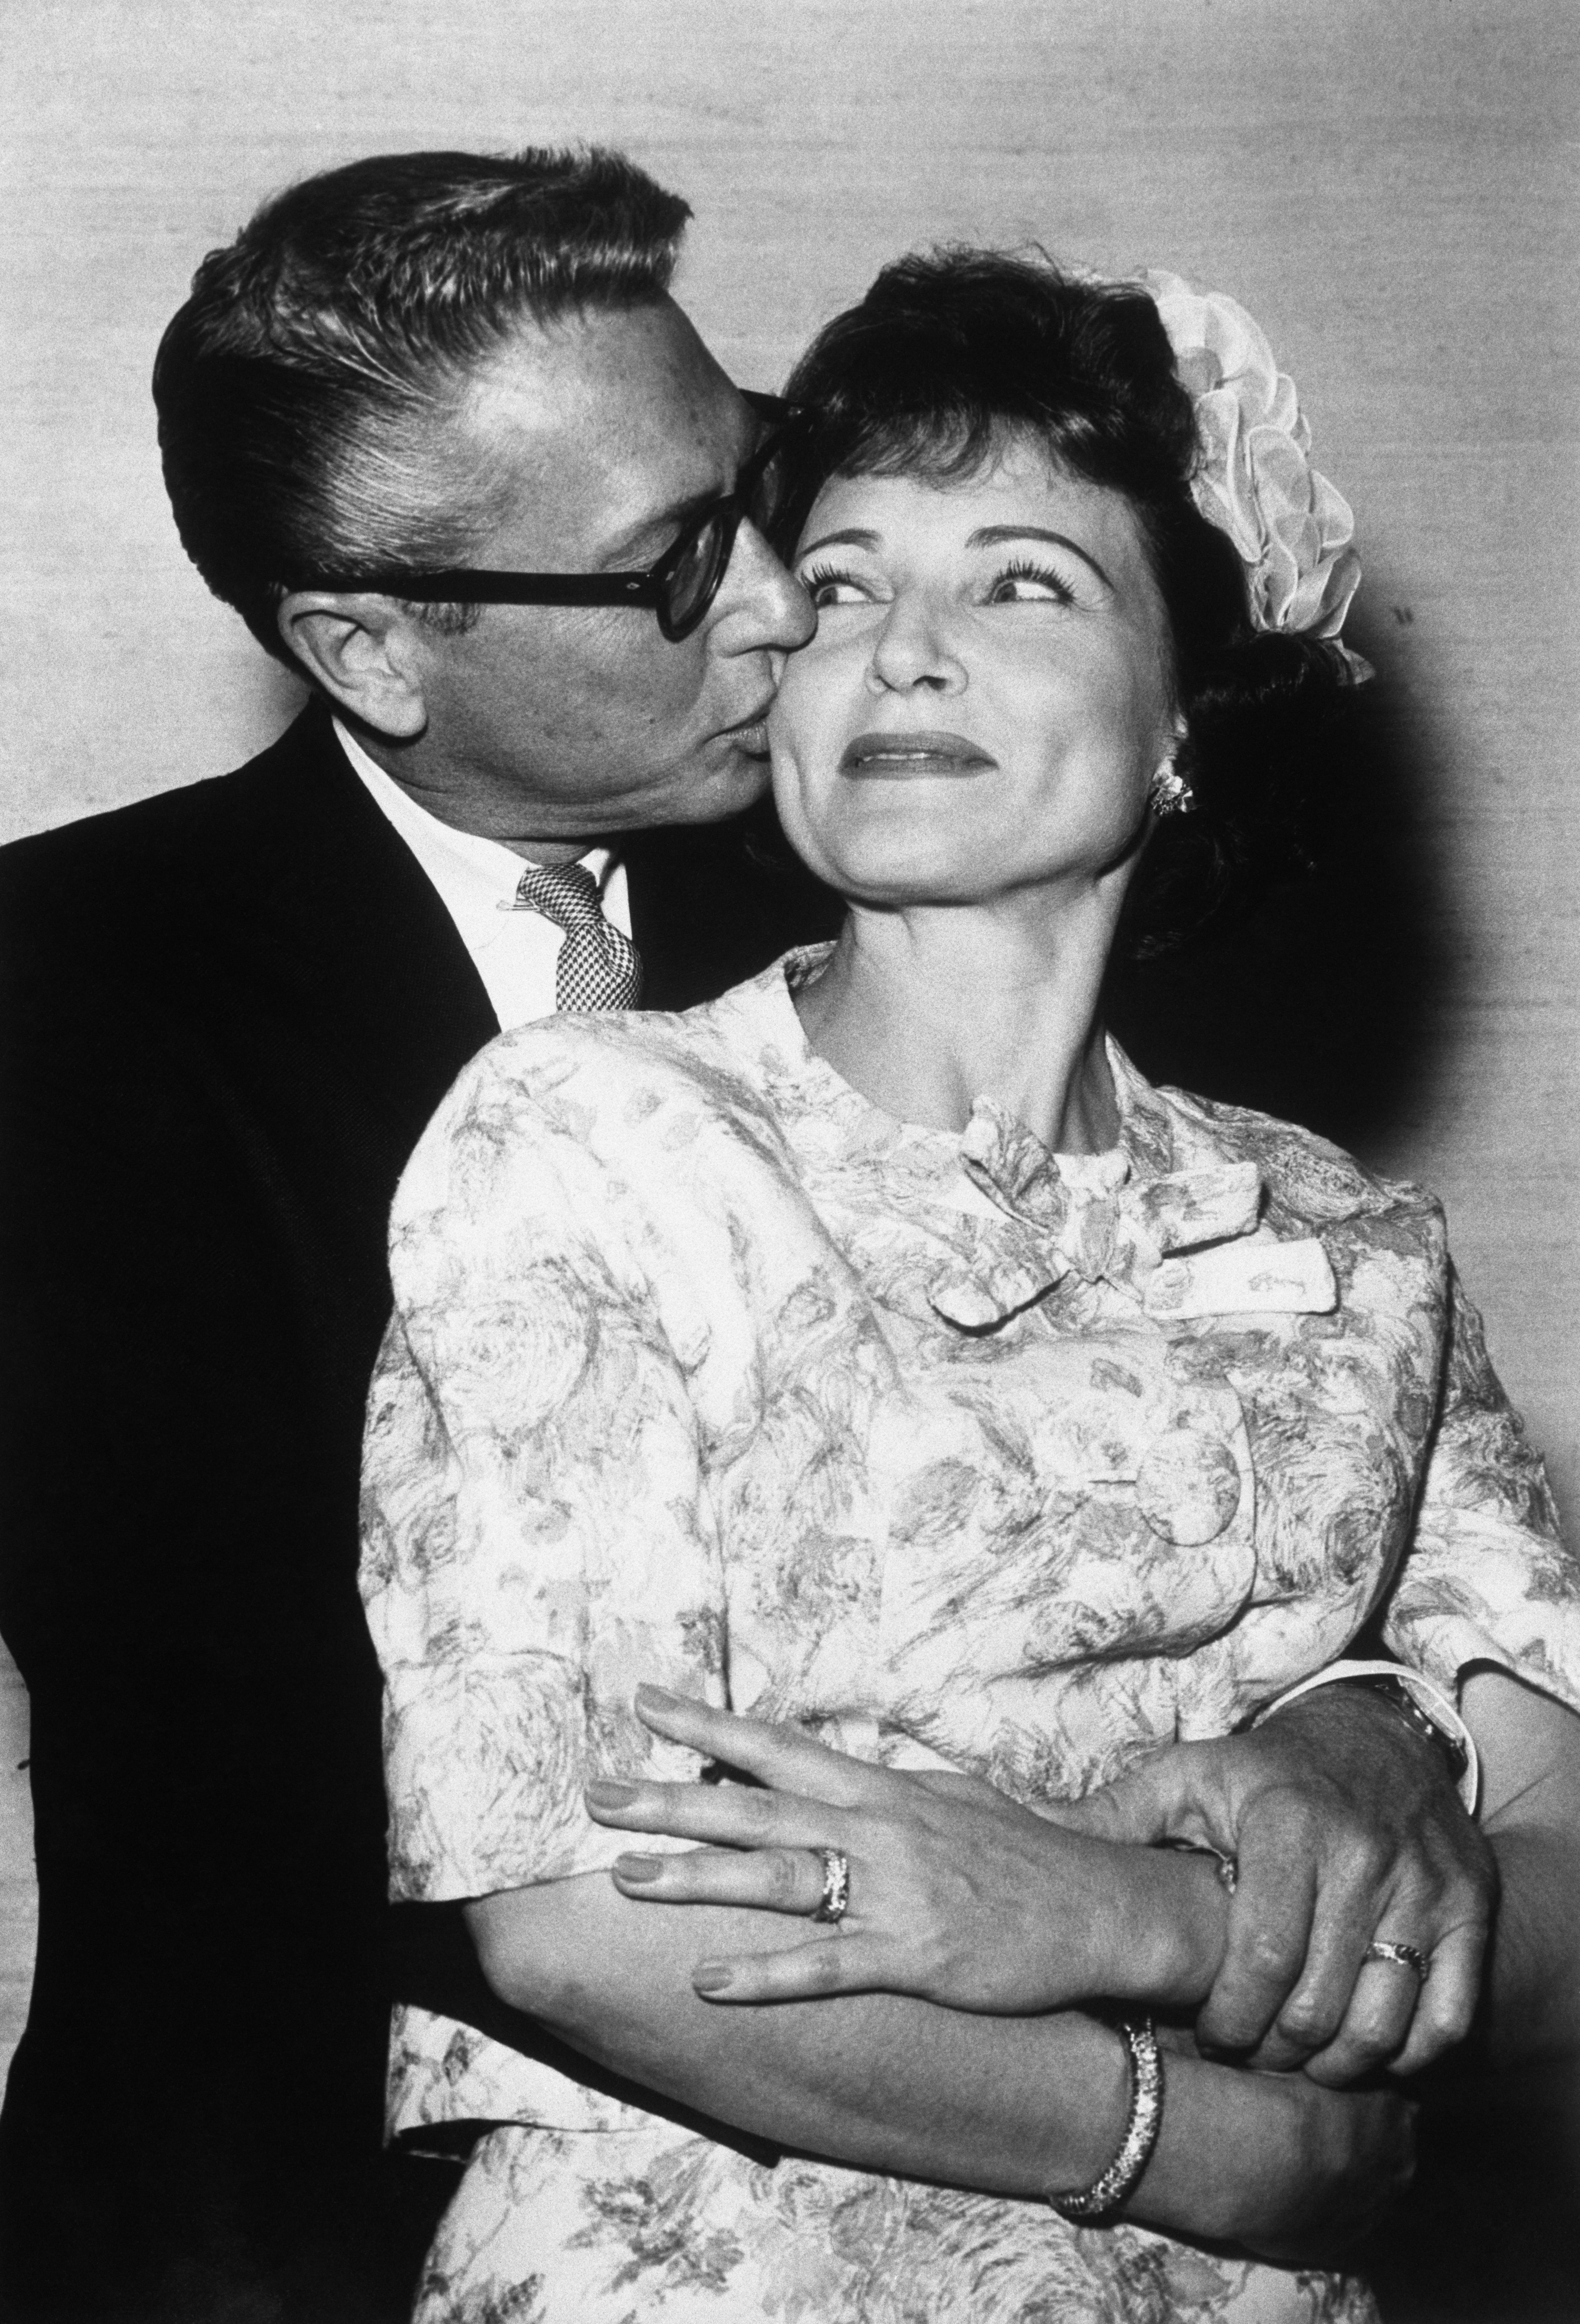 TV host Allen Ludden and Betty White pictured embracing following their wedding at the Sands Hotel on June 14, 1963 in Las Vegas, Nevada ┃ Source: Getty Images